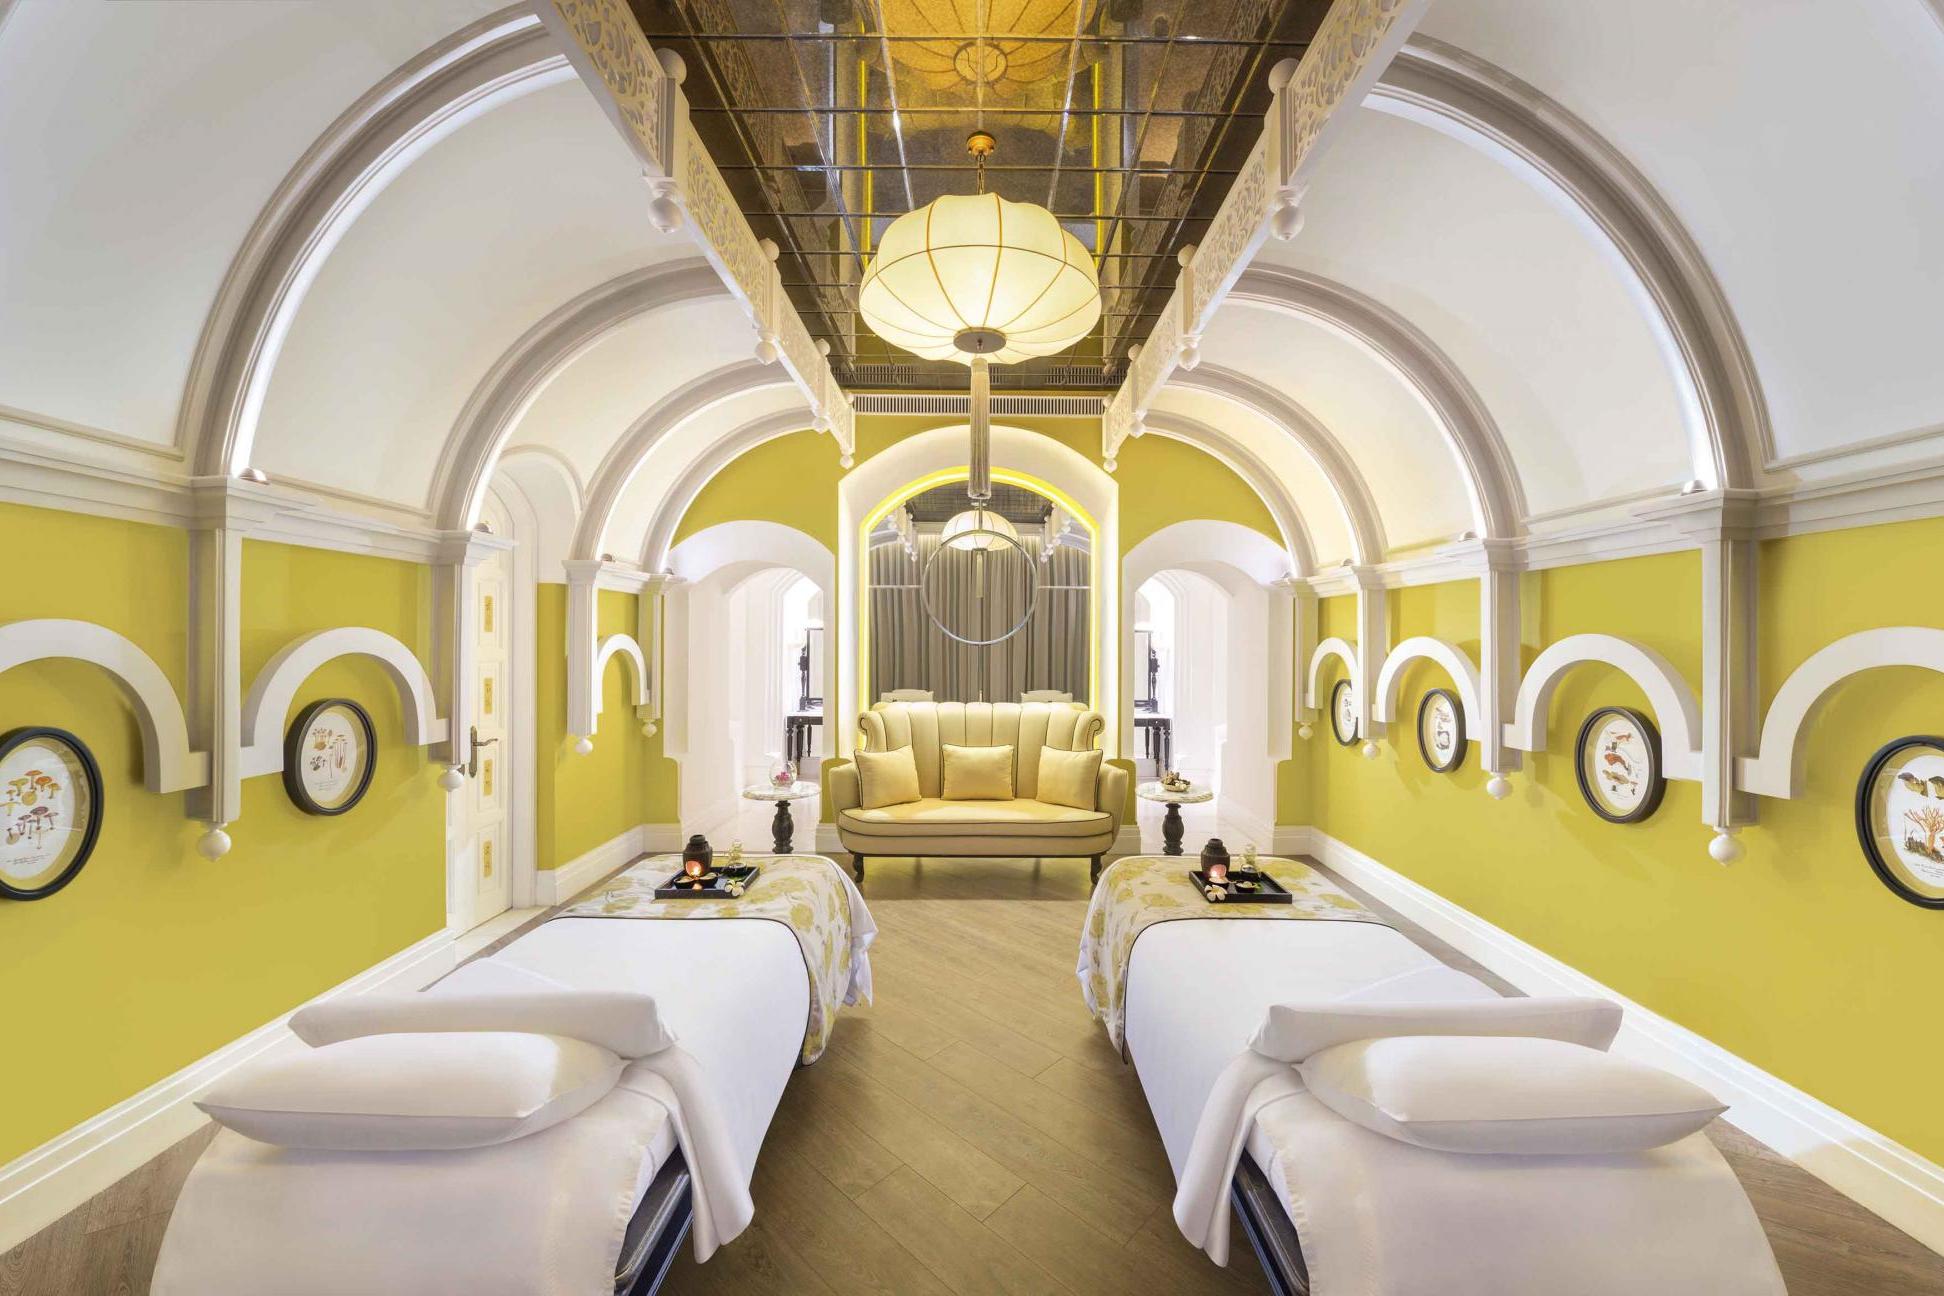 The Chanterelle Spa is inspired by mushrooms